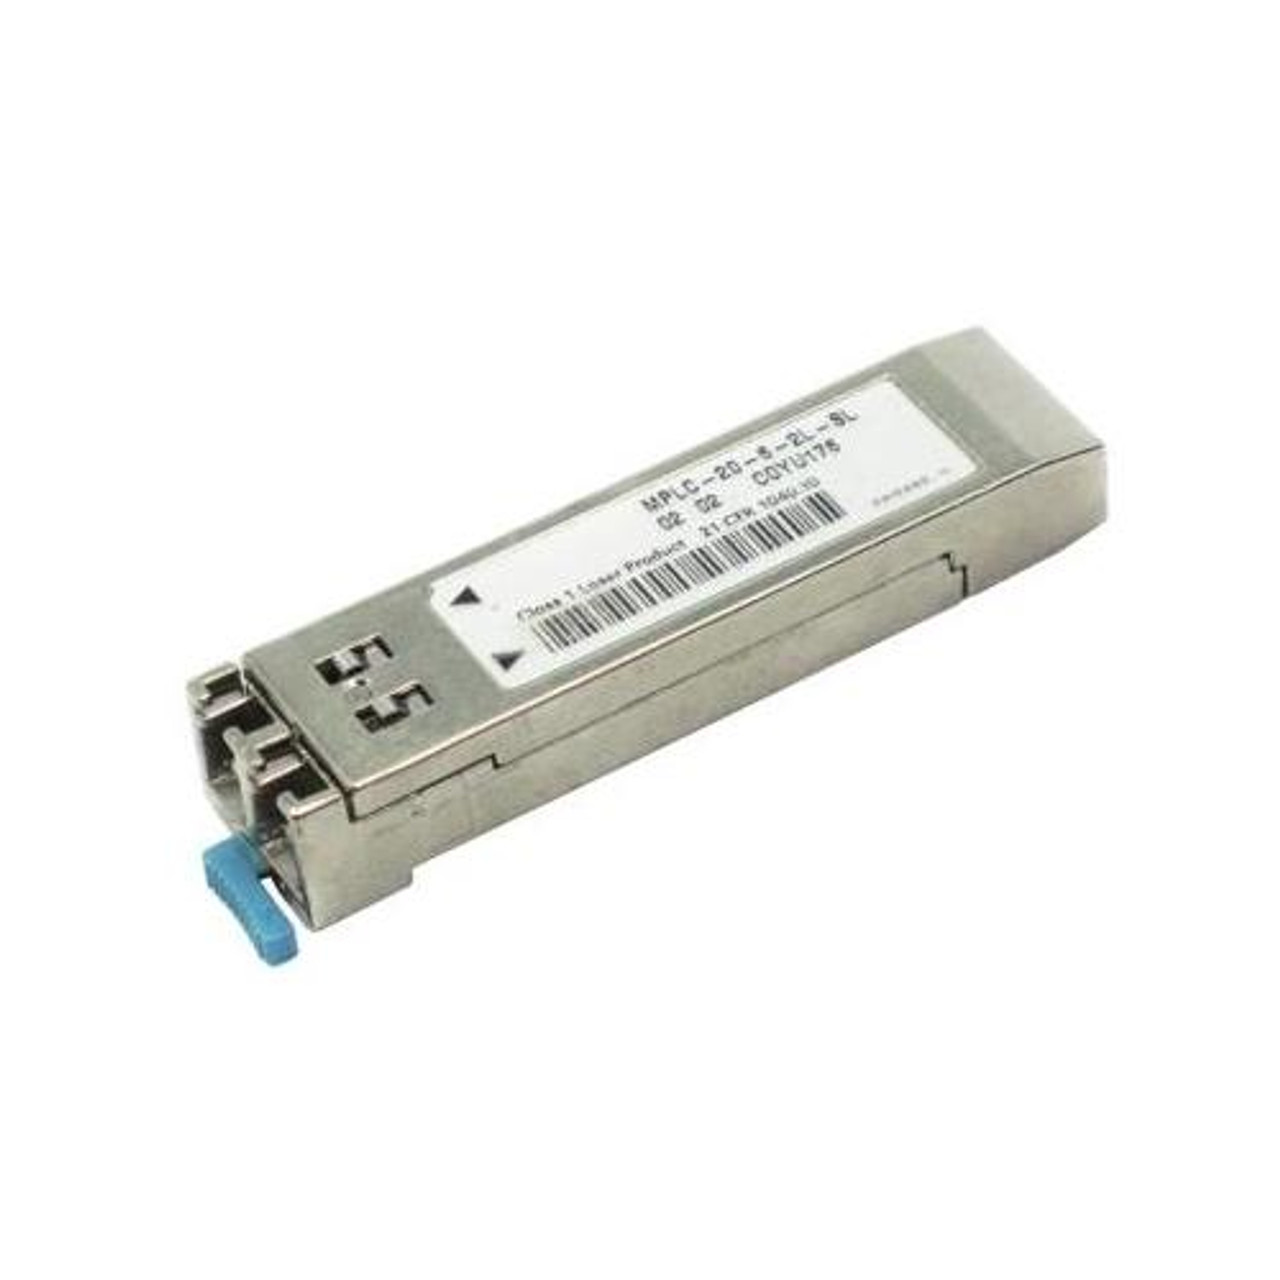 254142-001 HP 1000Mbps Long Wave Fibre Channel 1300nm Optical GBIC Transceiver